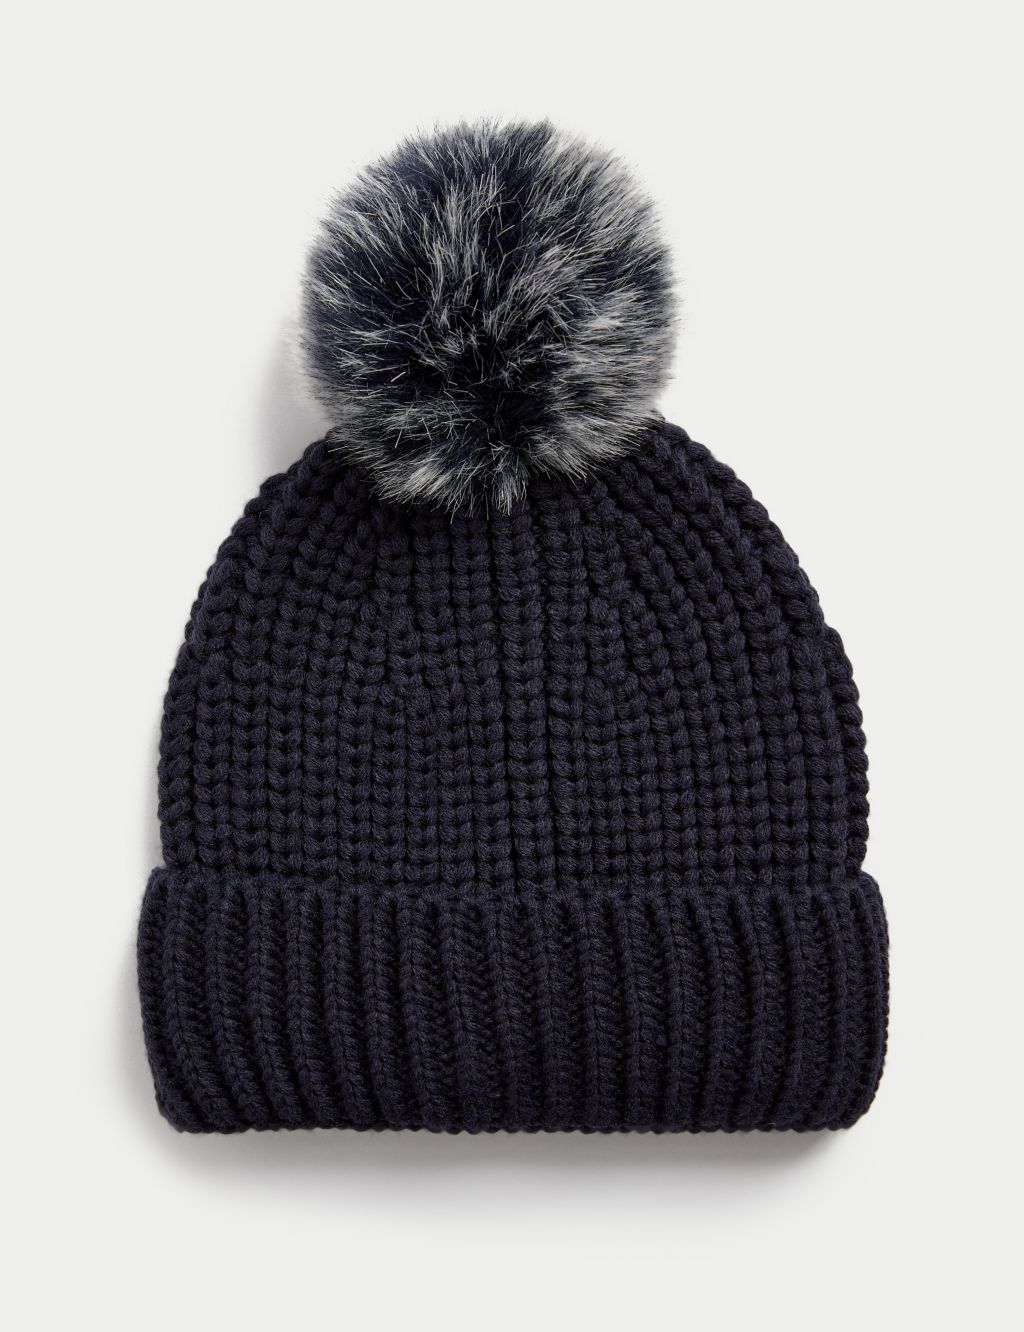 Knitted Pom Hat image 1